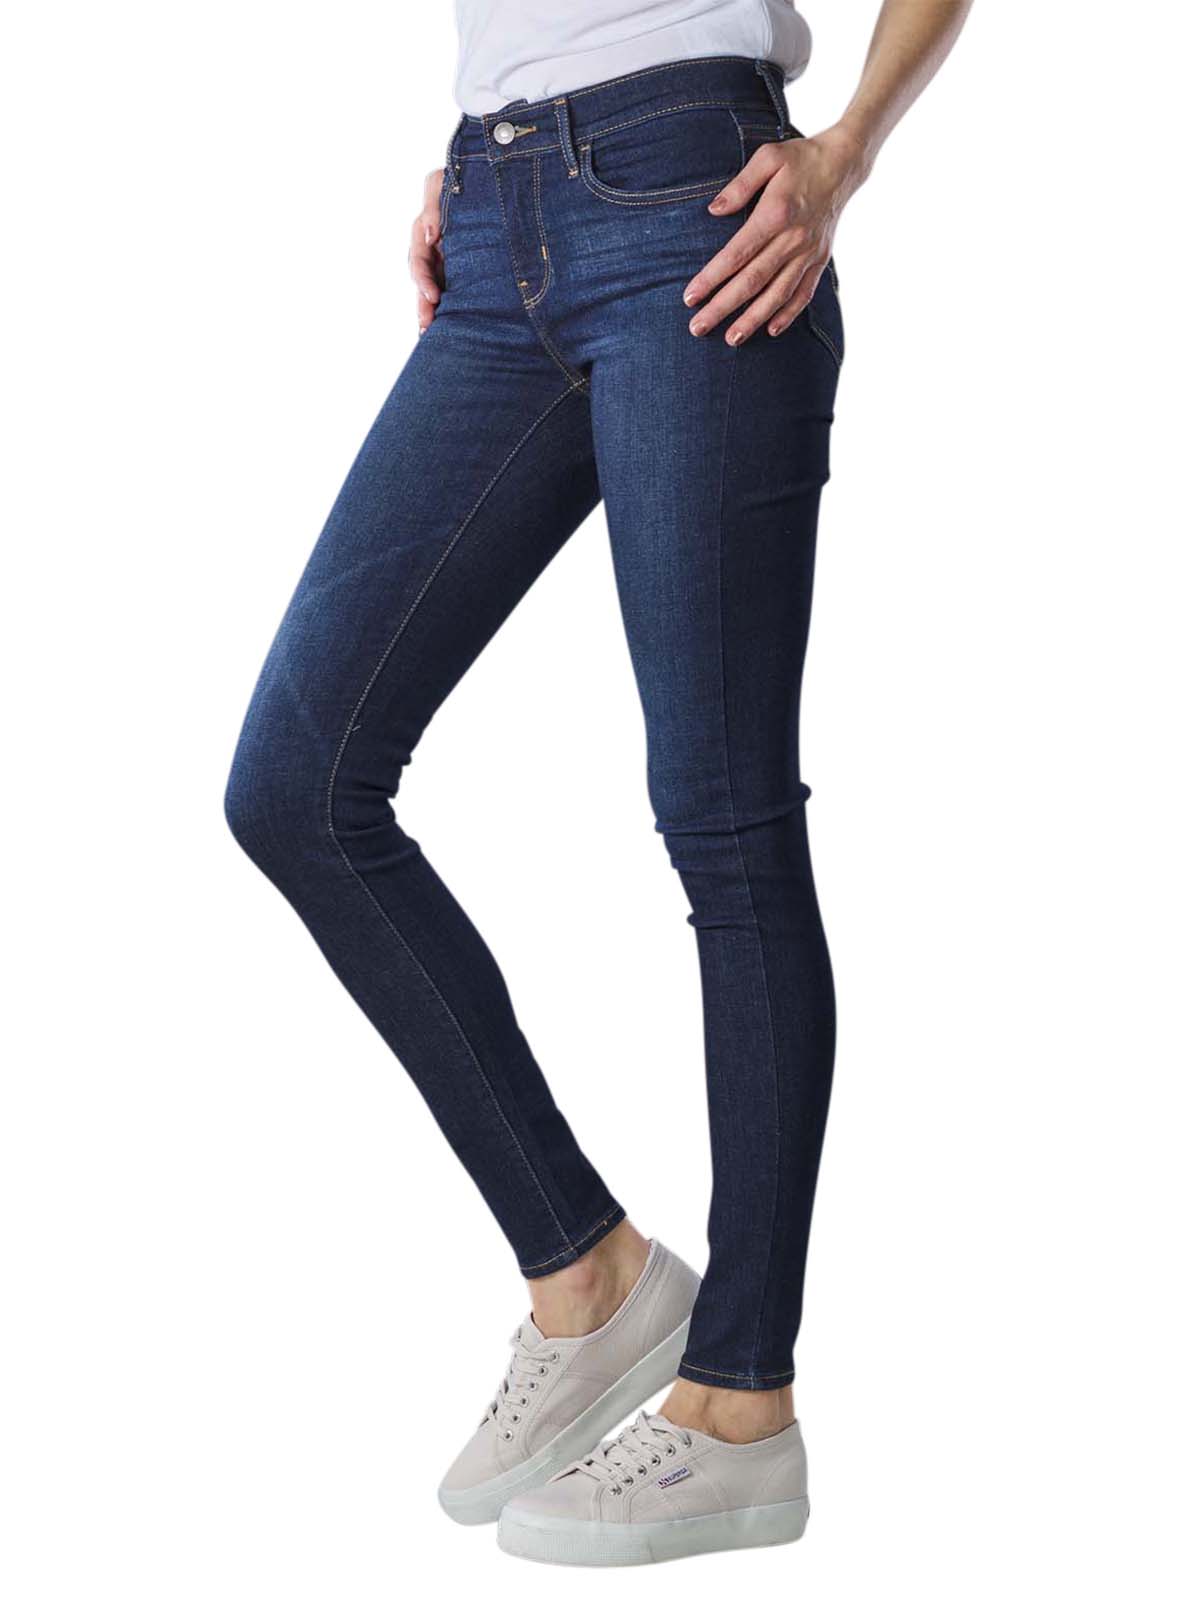 Levi's 710 Jeans Super Skinny wandering mind Levi's Women's Jeans | Free  Shipping on  - SIMPLY LOOK GOOD